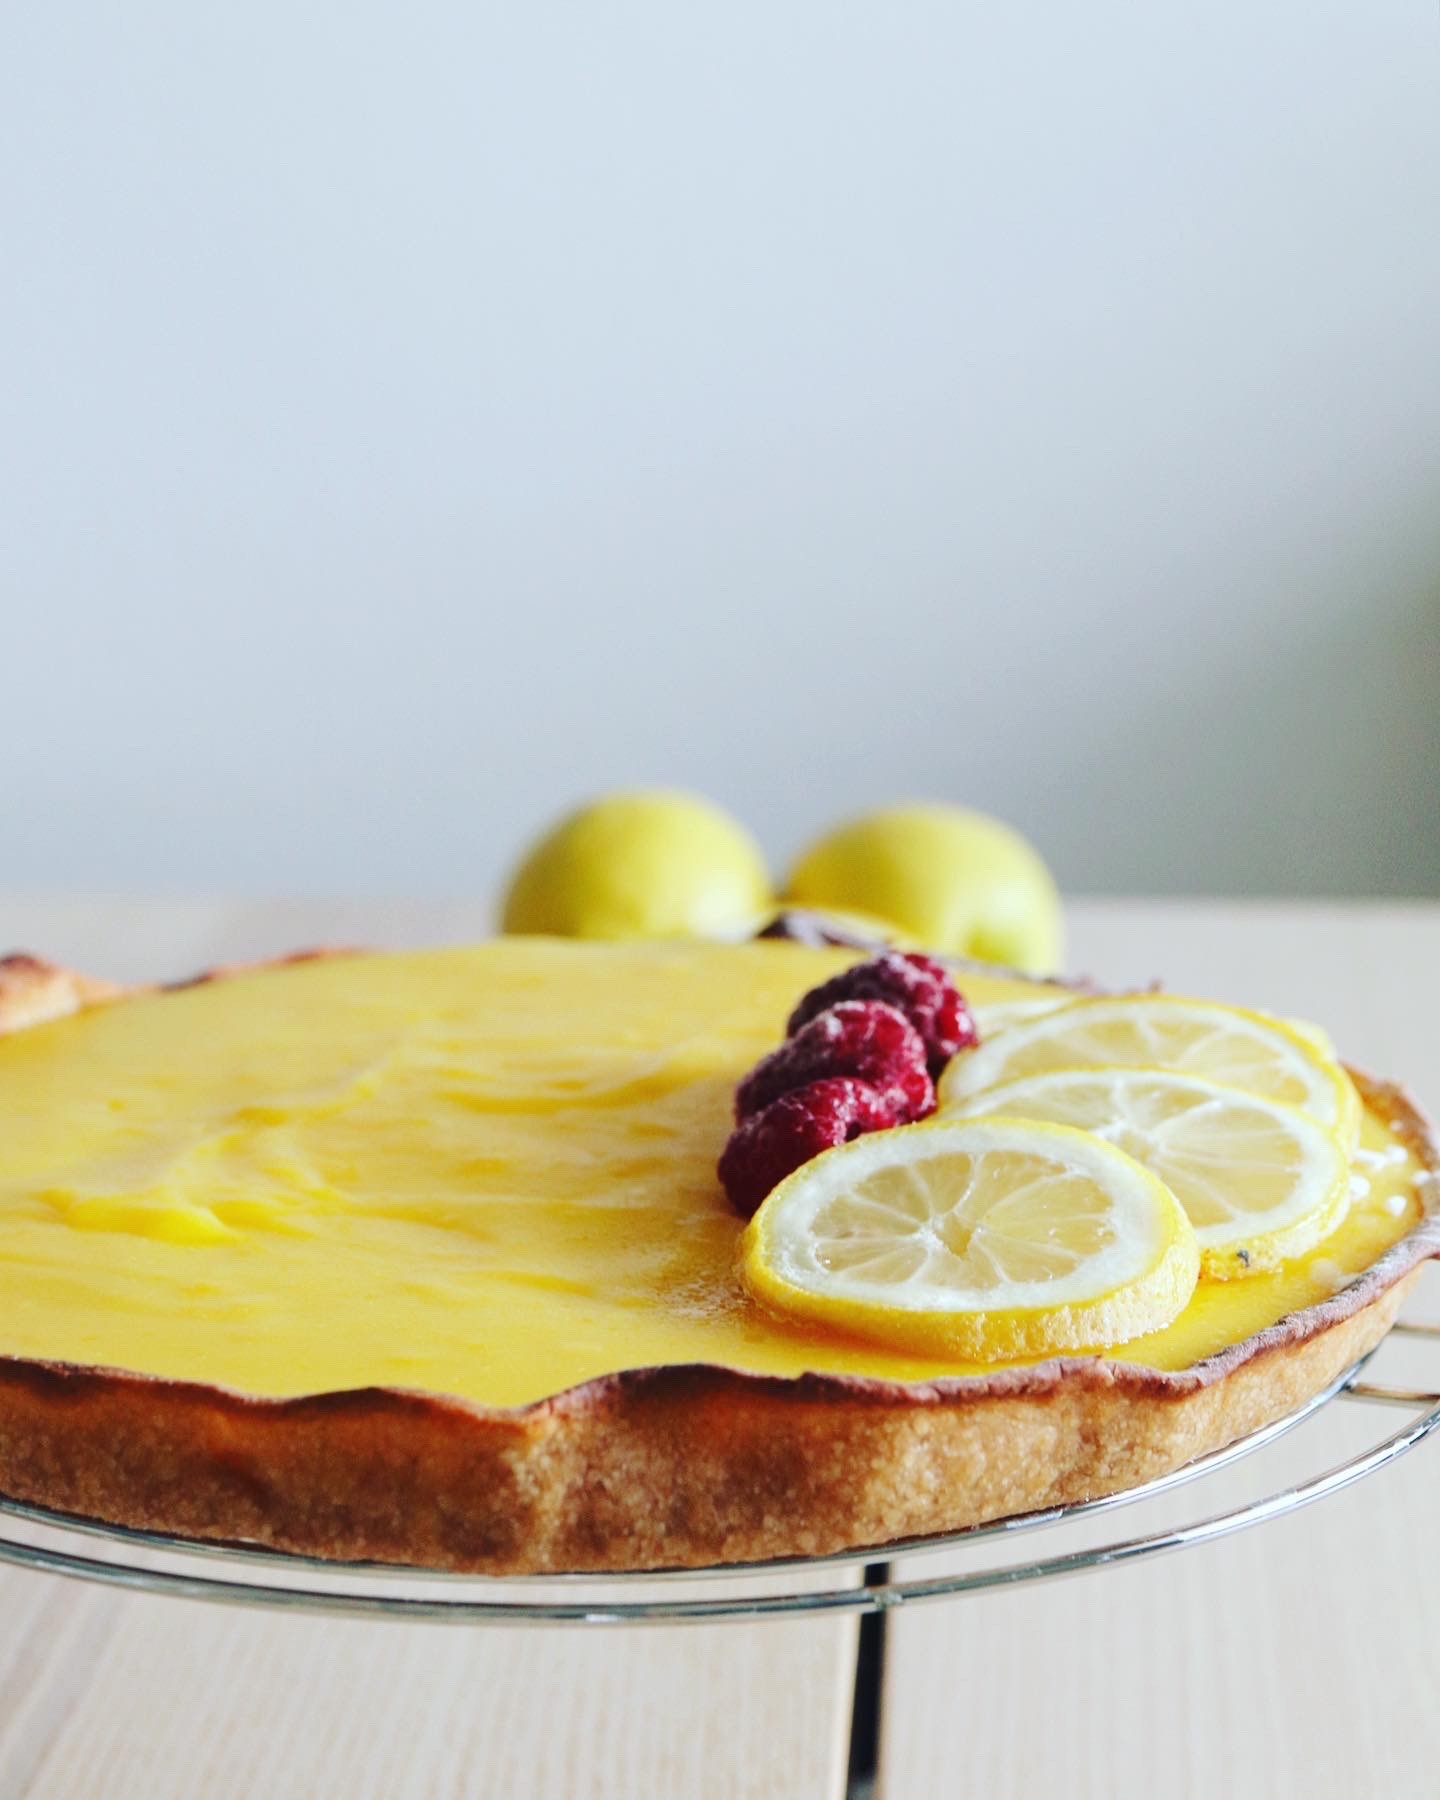 Lemon ginger pie, decorated with lemon slices